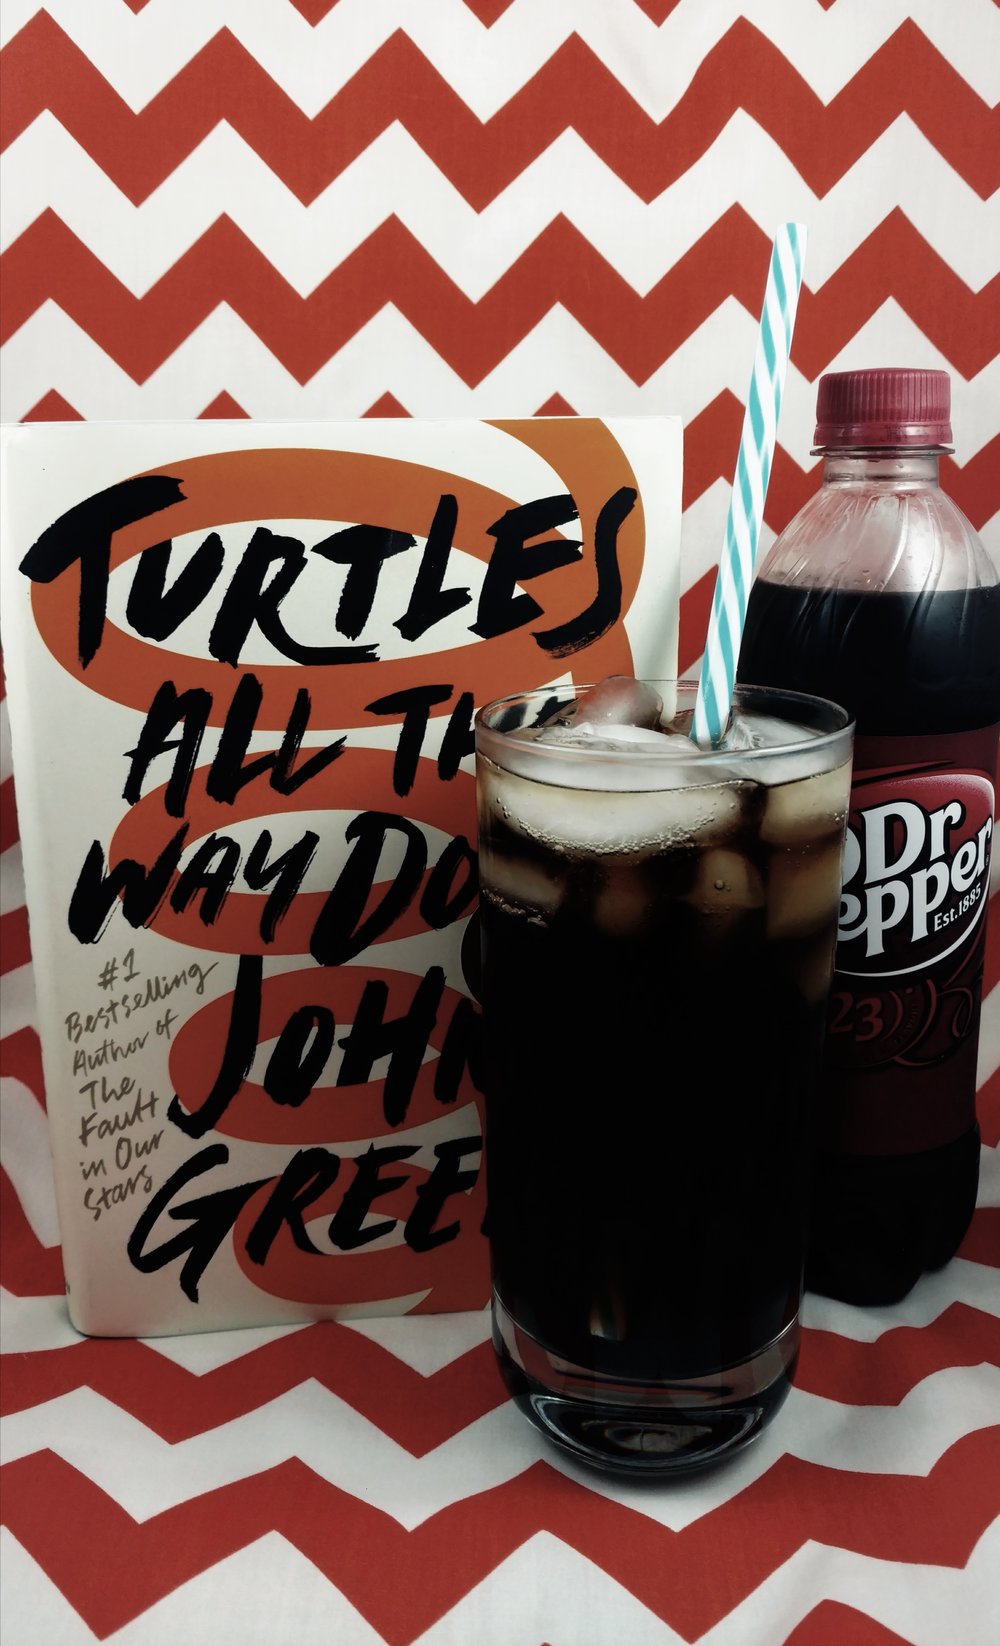 Review: Turtles All The Way Down by John Green